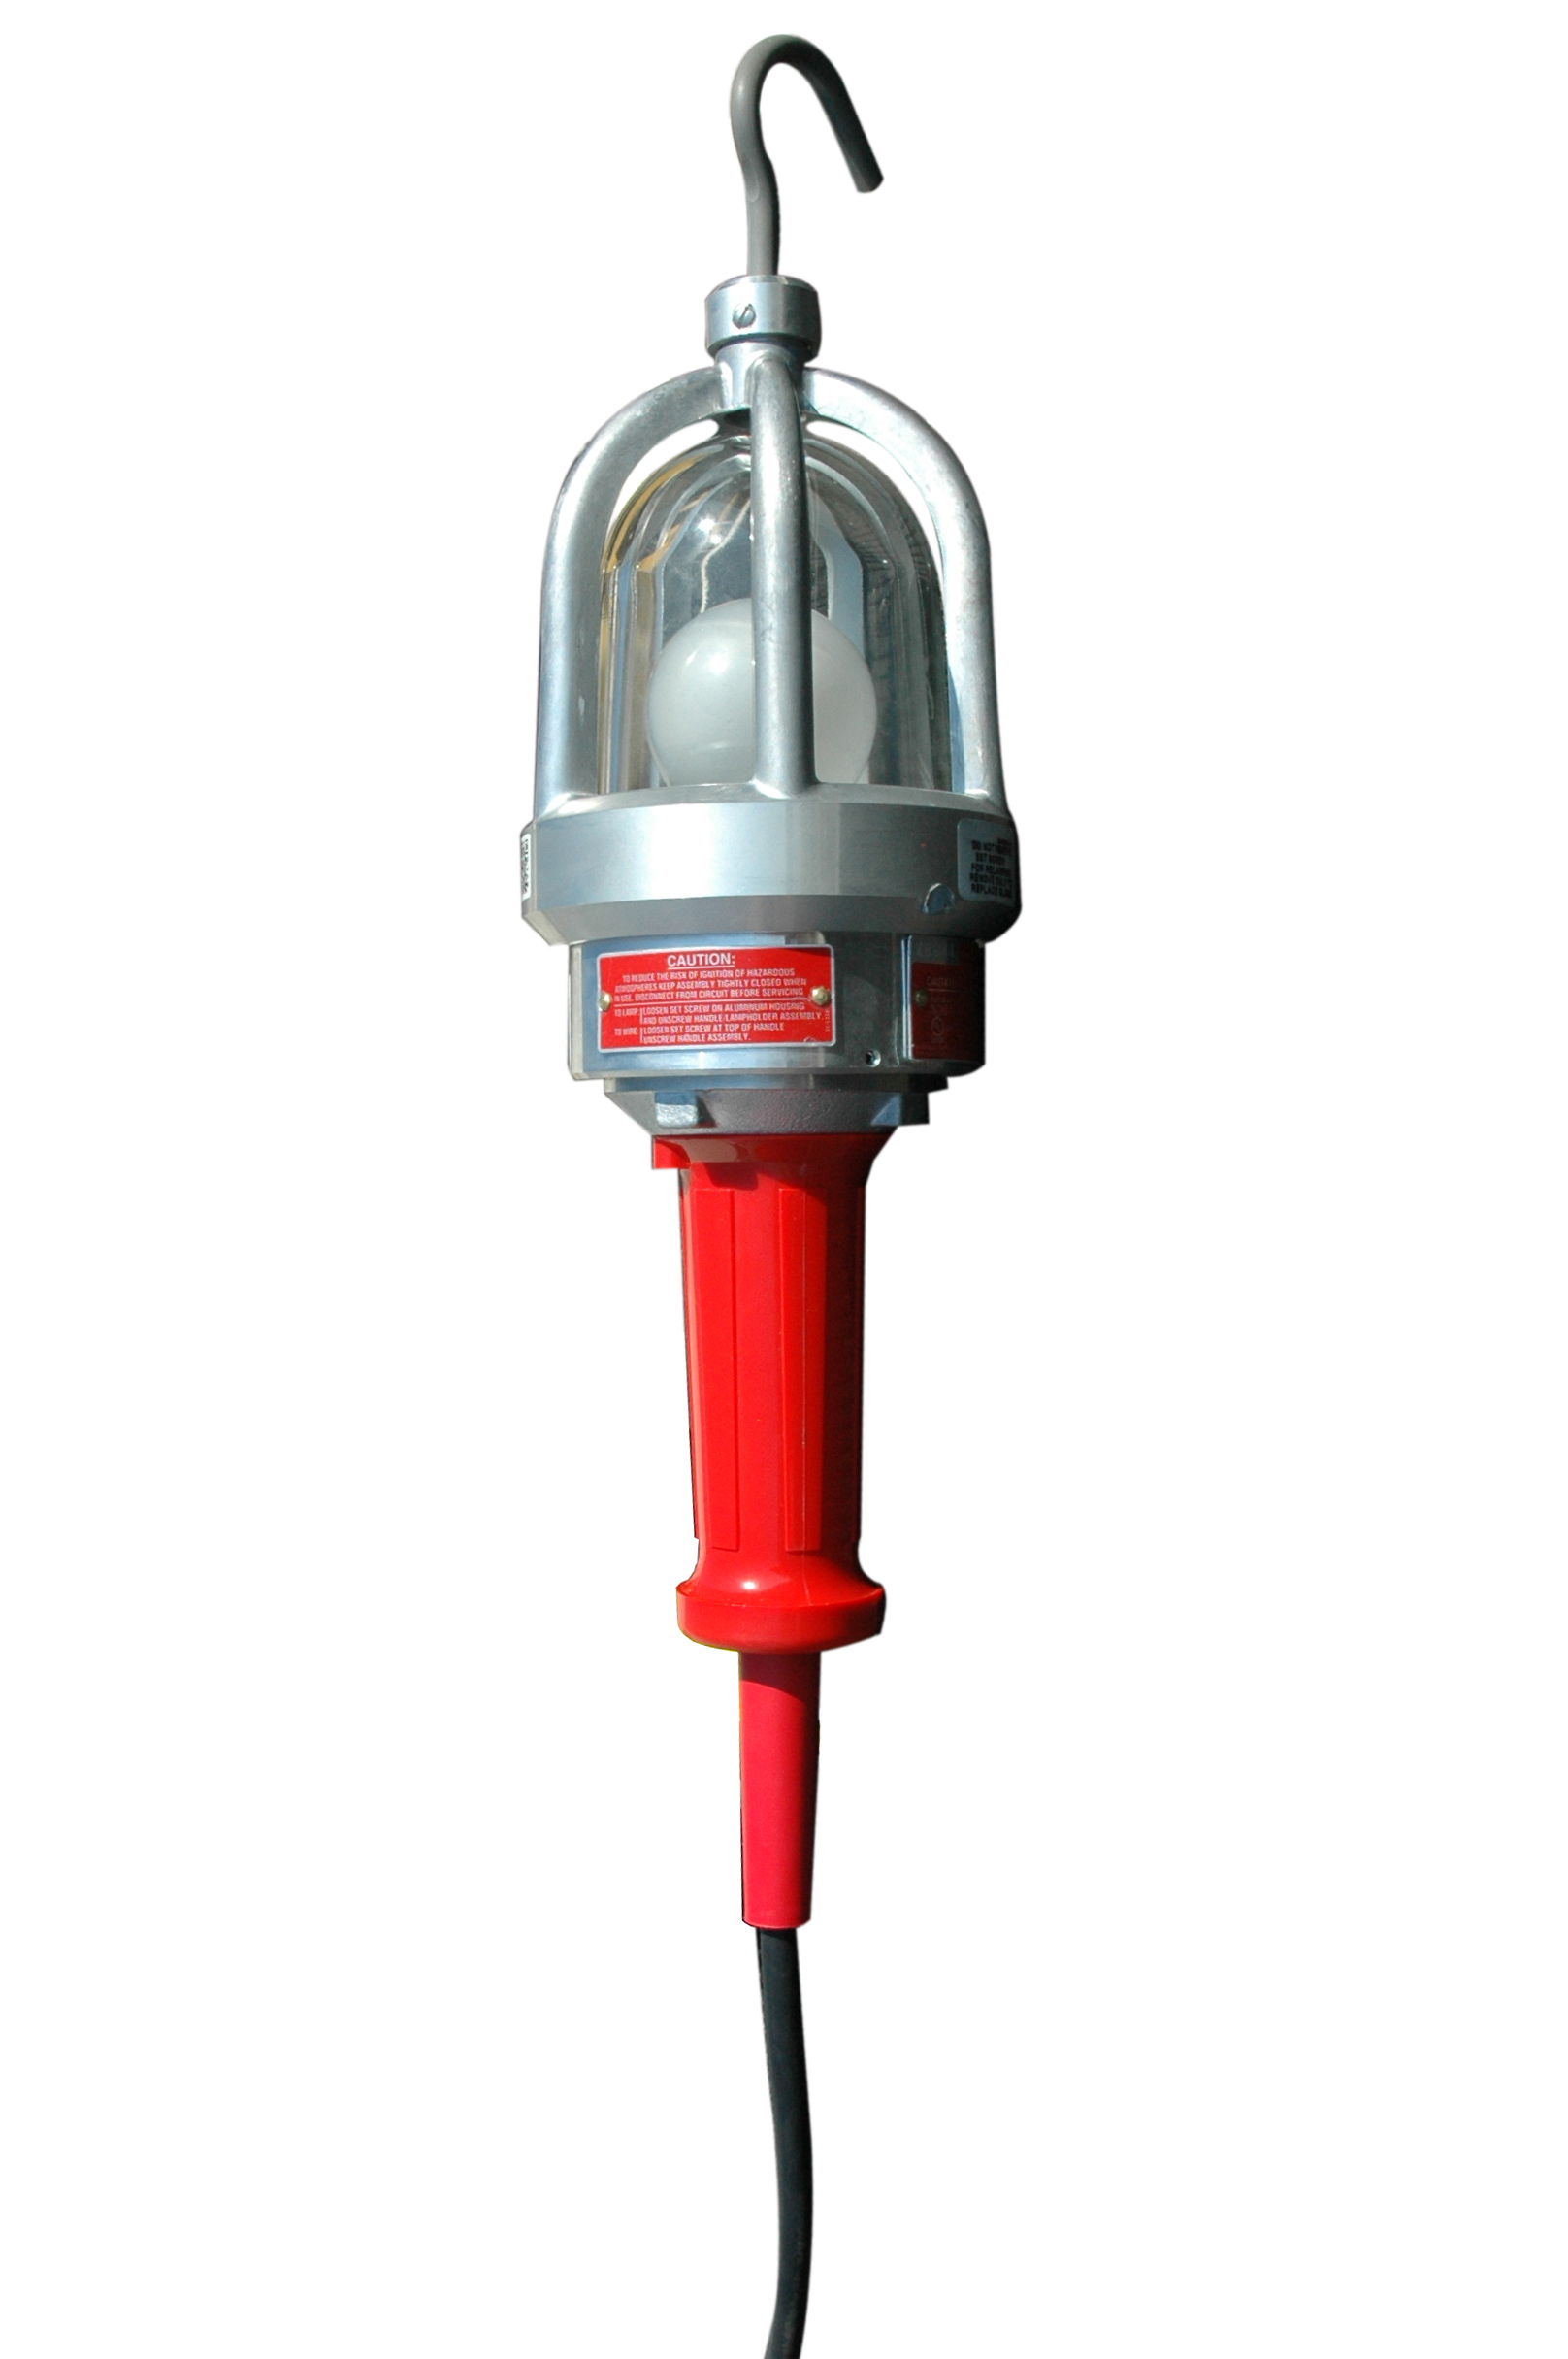 Class 1 Division 1 Explosion Proof LED String Lights for Hazardous Locations